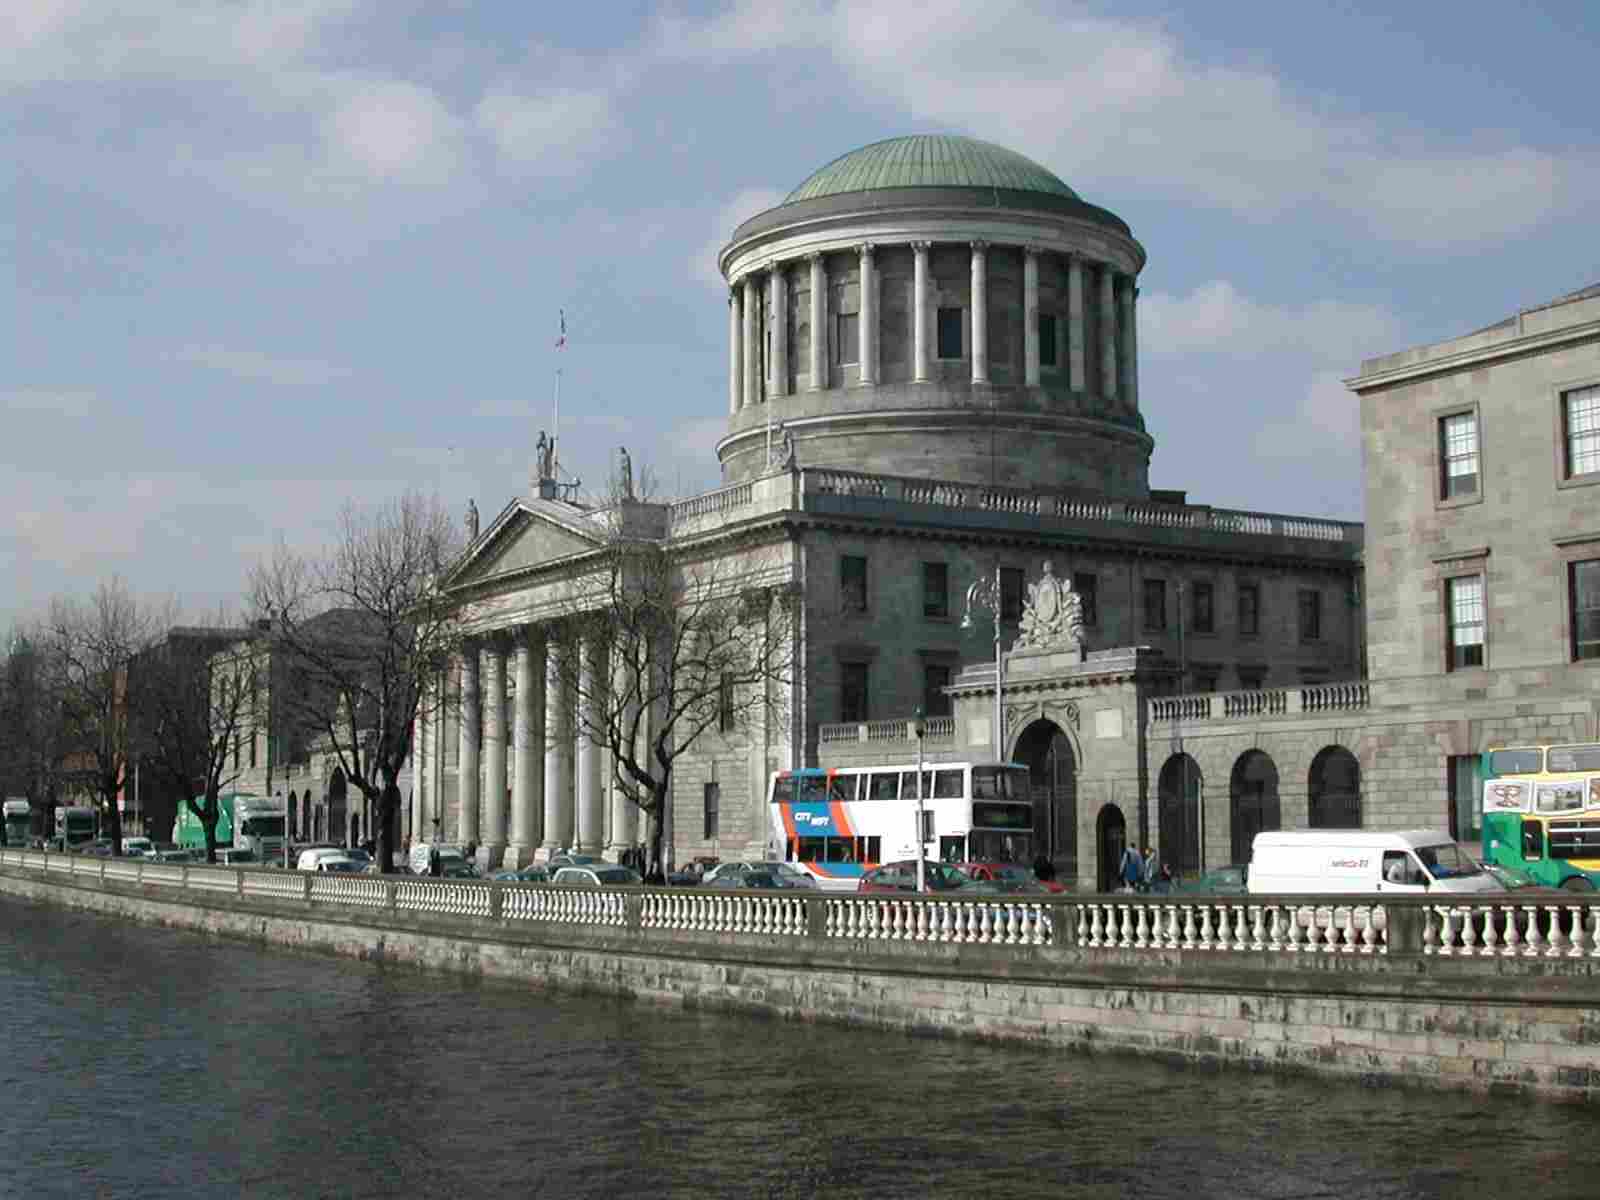 The Four Courts by the Liffey, Dublin